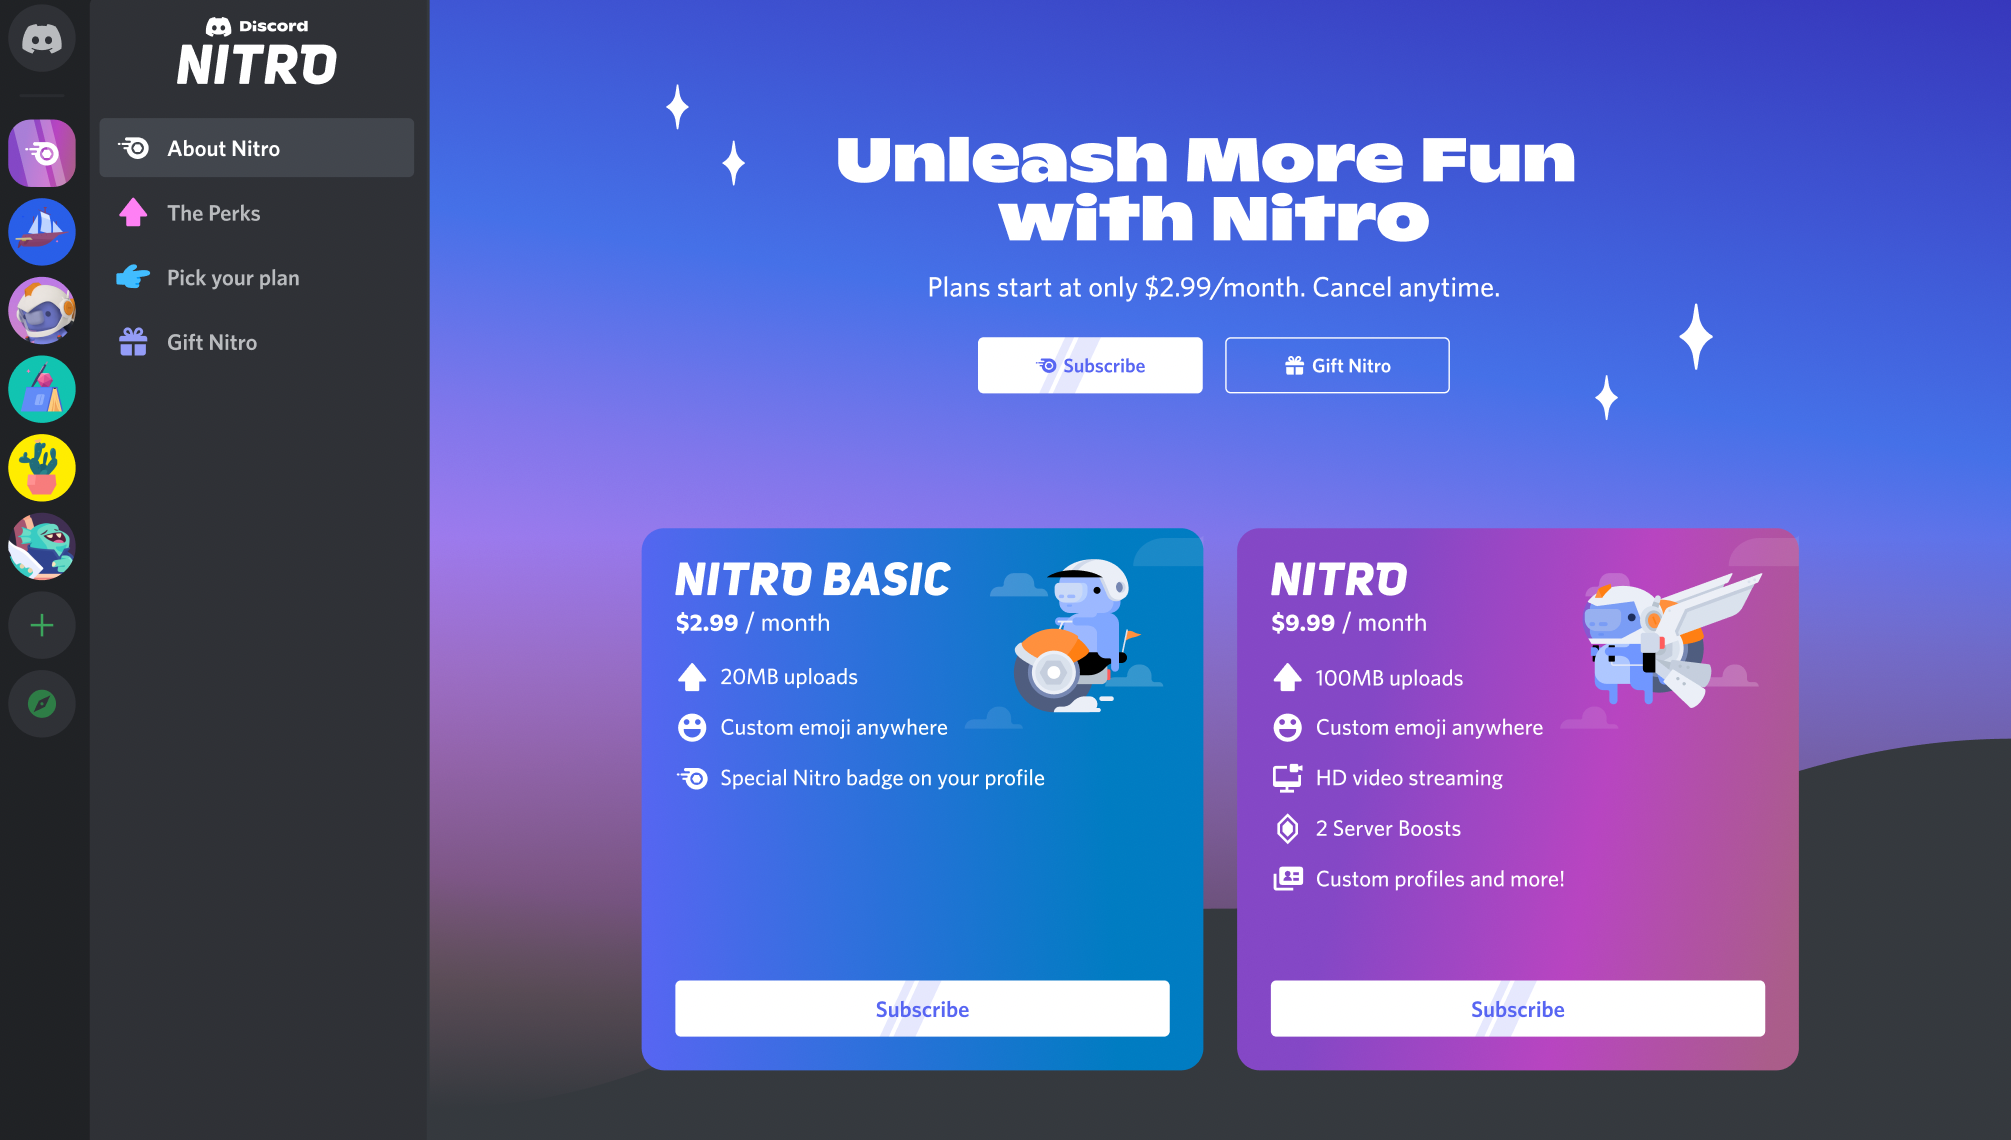 Discord Nitro and Discord basic plans shown side-by-side with pricing and perks for each.